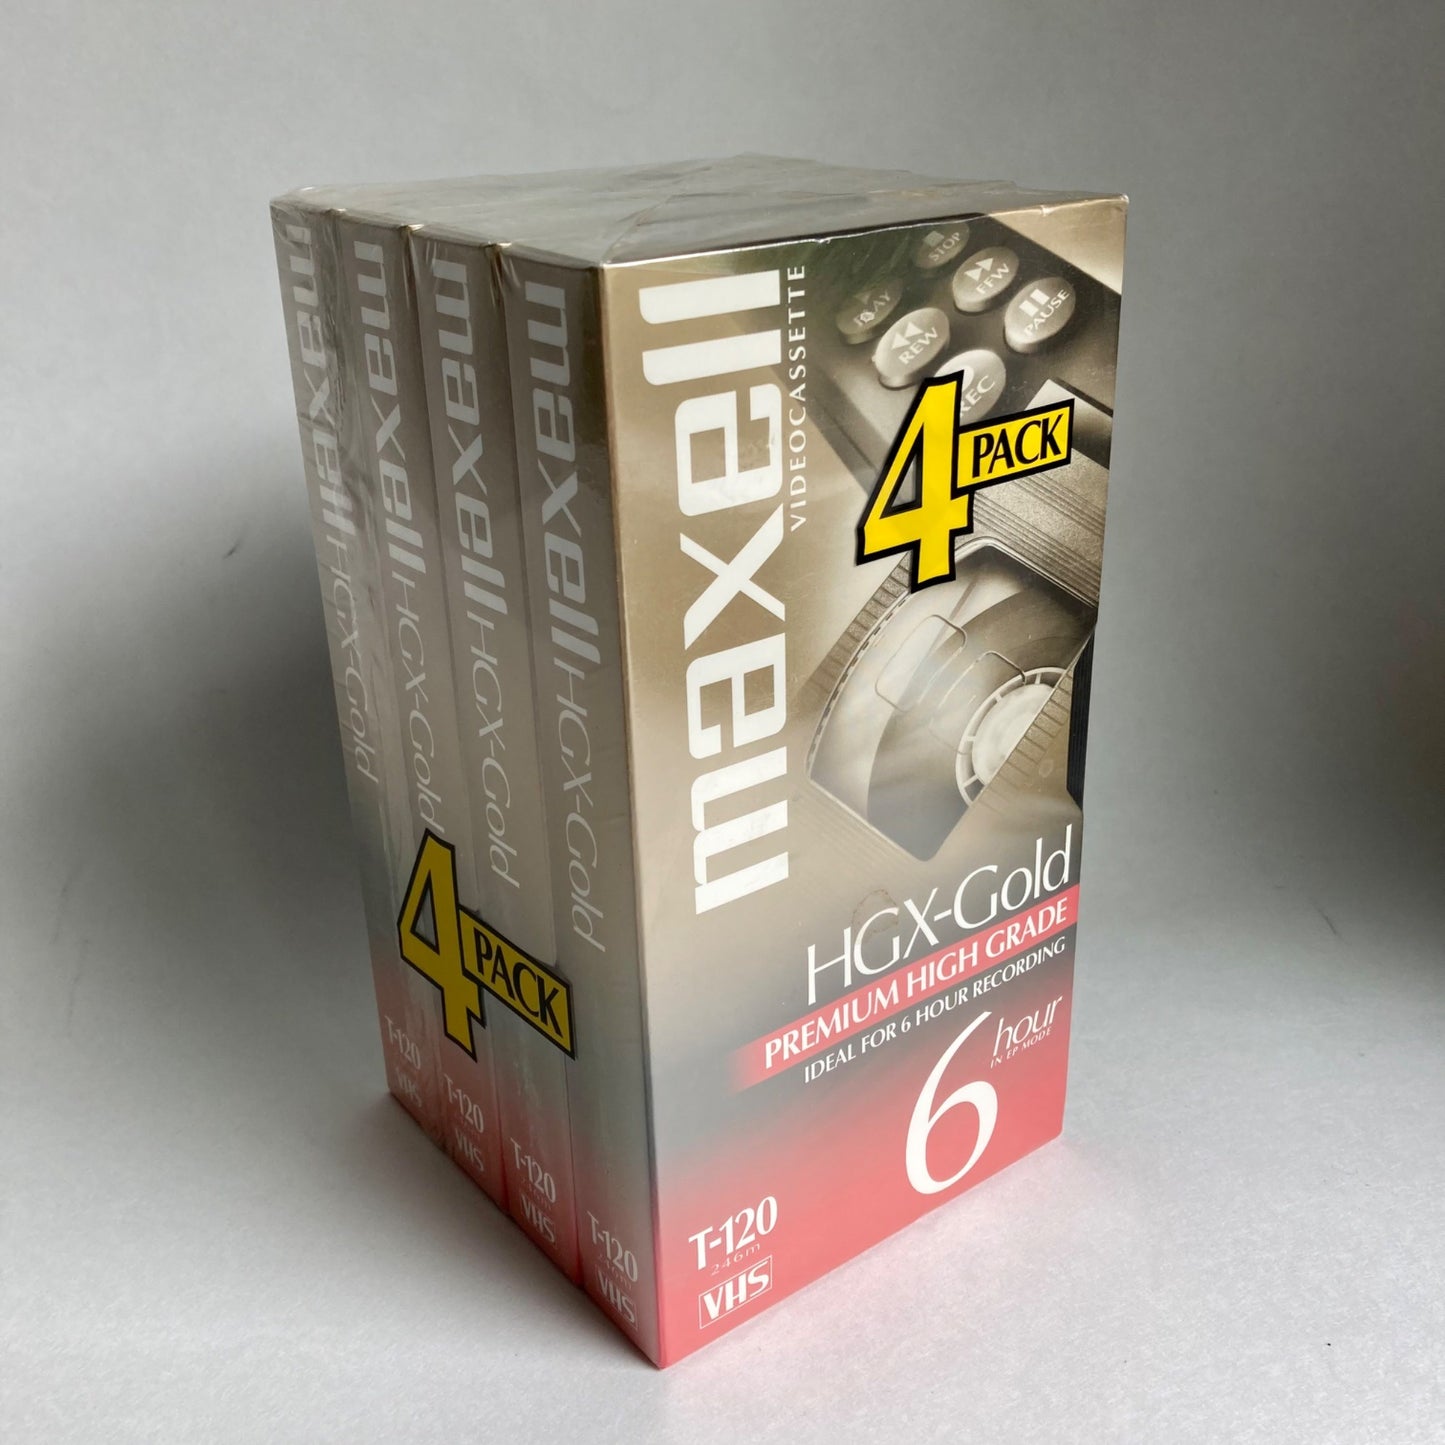 4-Pack Maxell Blank VHS Tapes HGX-Gold Premium High Grade T-120 NEW SEALED!